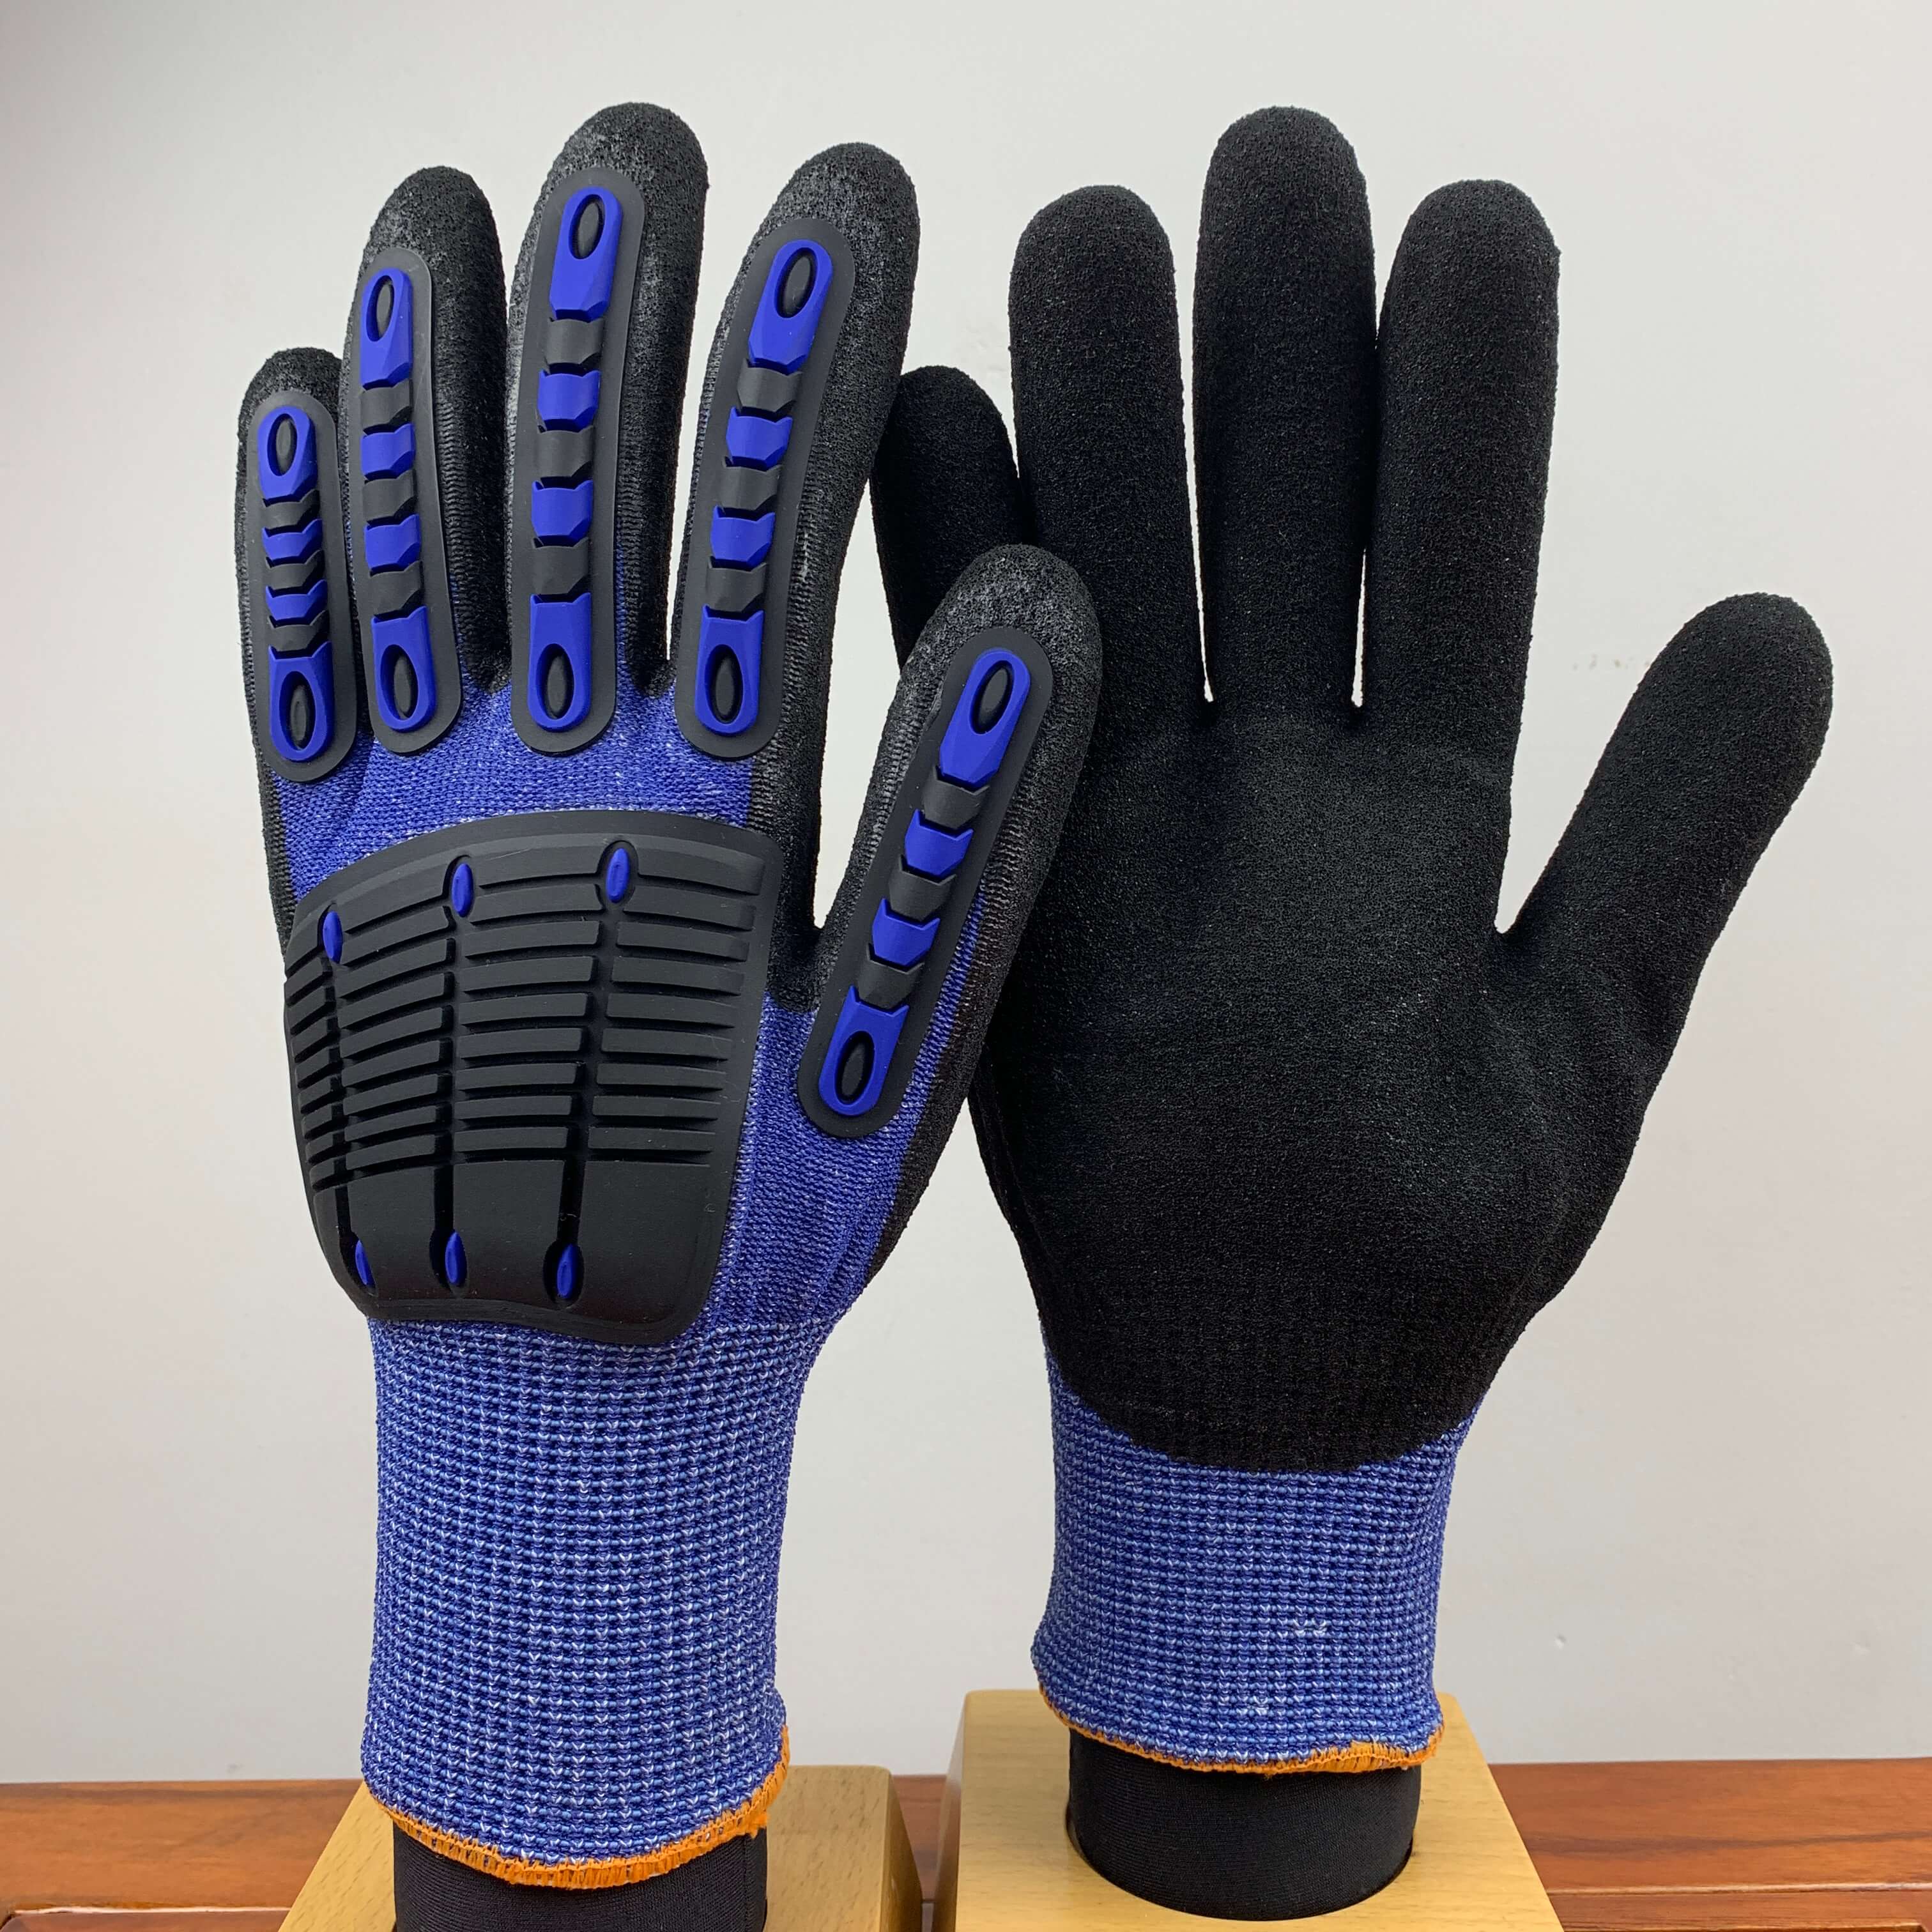 ANSI A5 Anti-Cut 13G Hppe/Steel Knit Sandy Nitrile TPR Cut Resistant Impact Safety Work Gloves